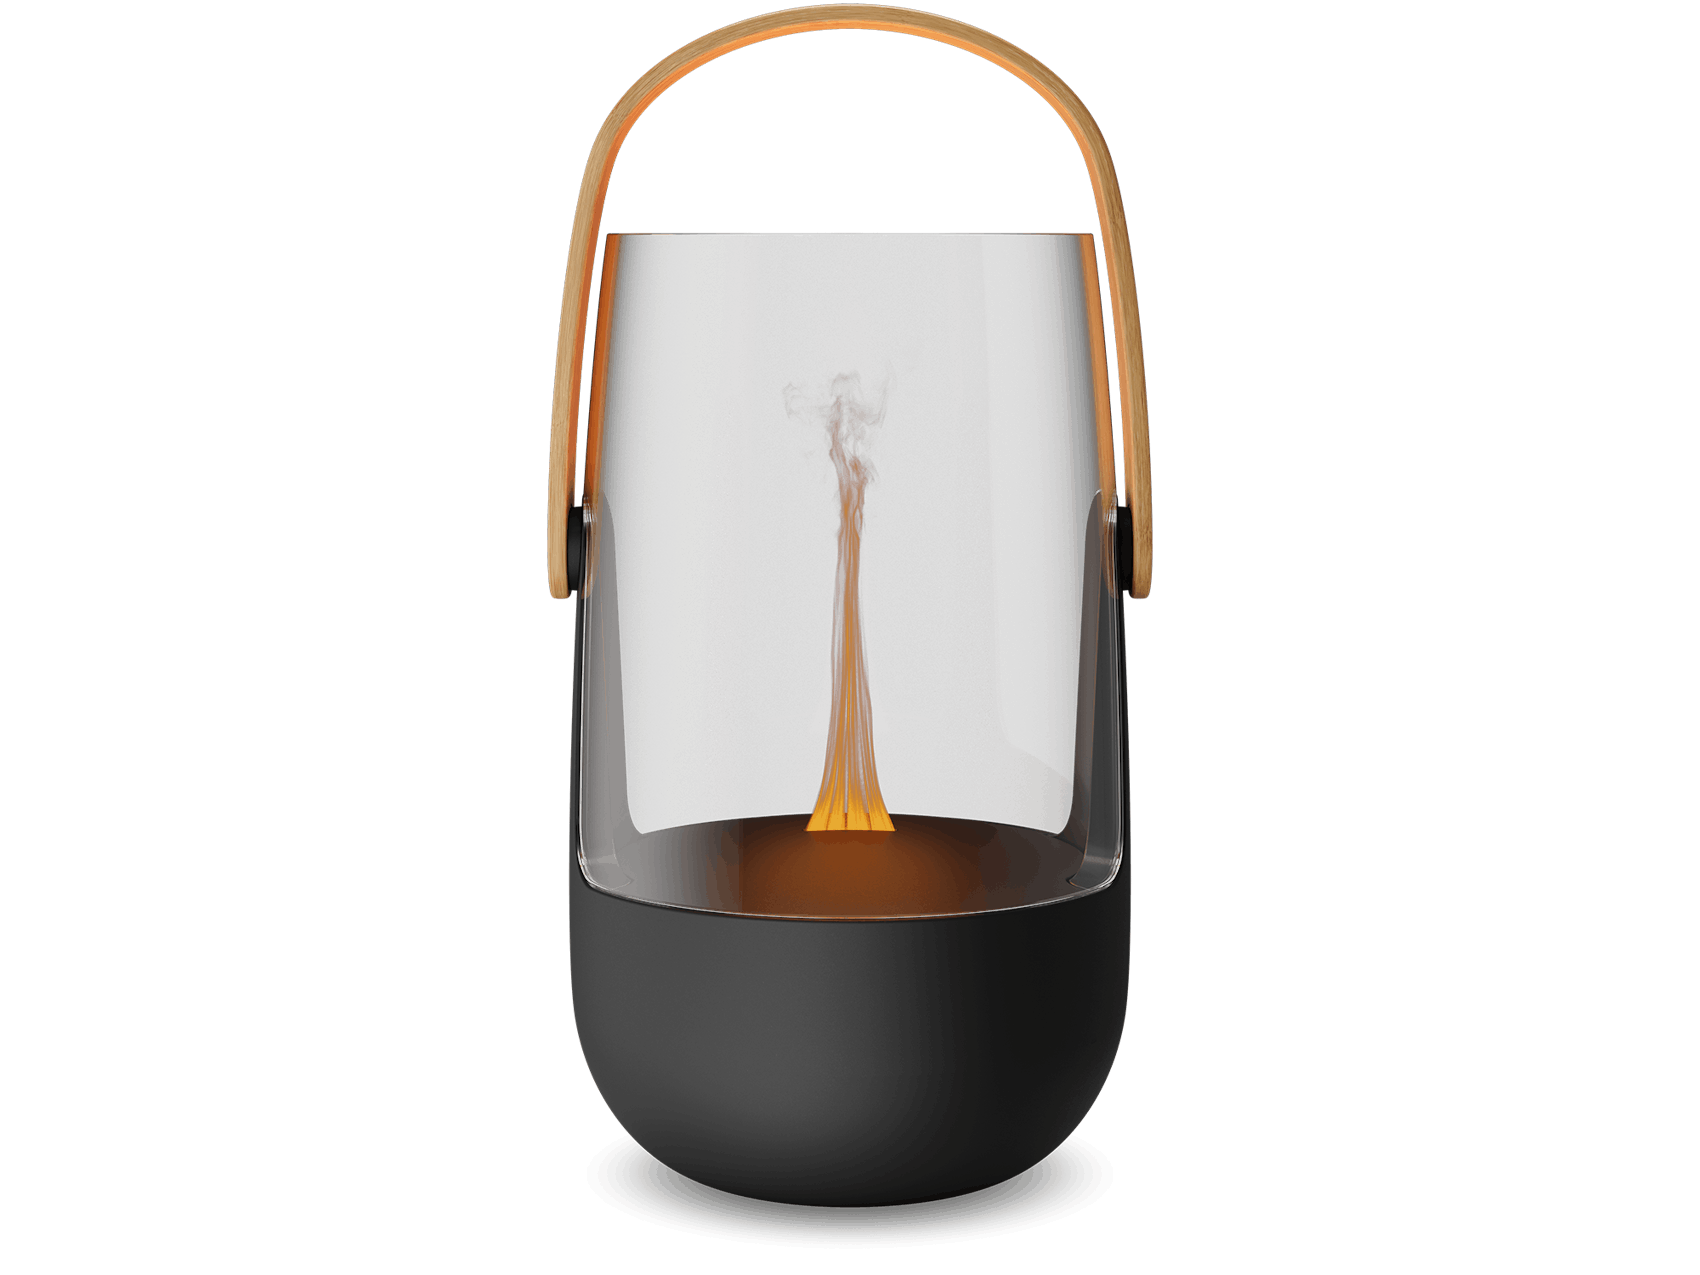 Sophie aroma diffuser by Stadler Form in black as front view